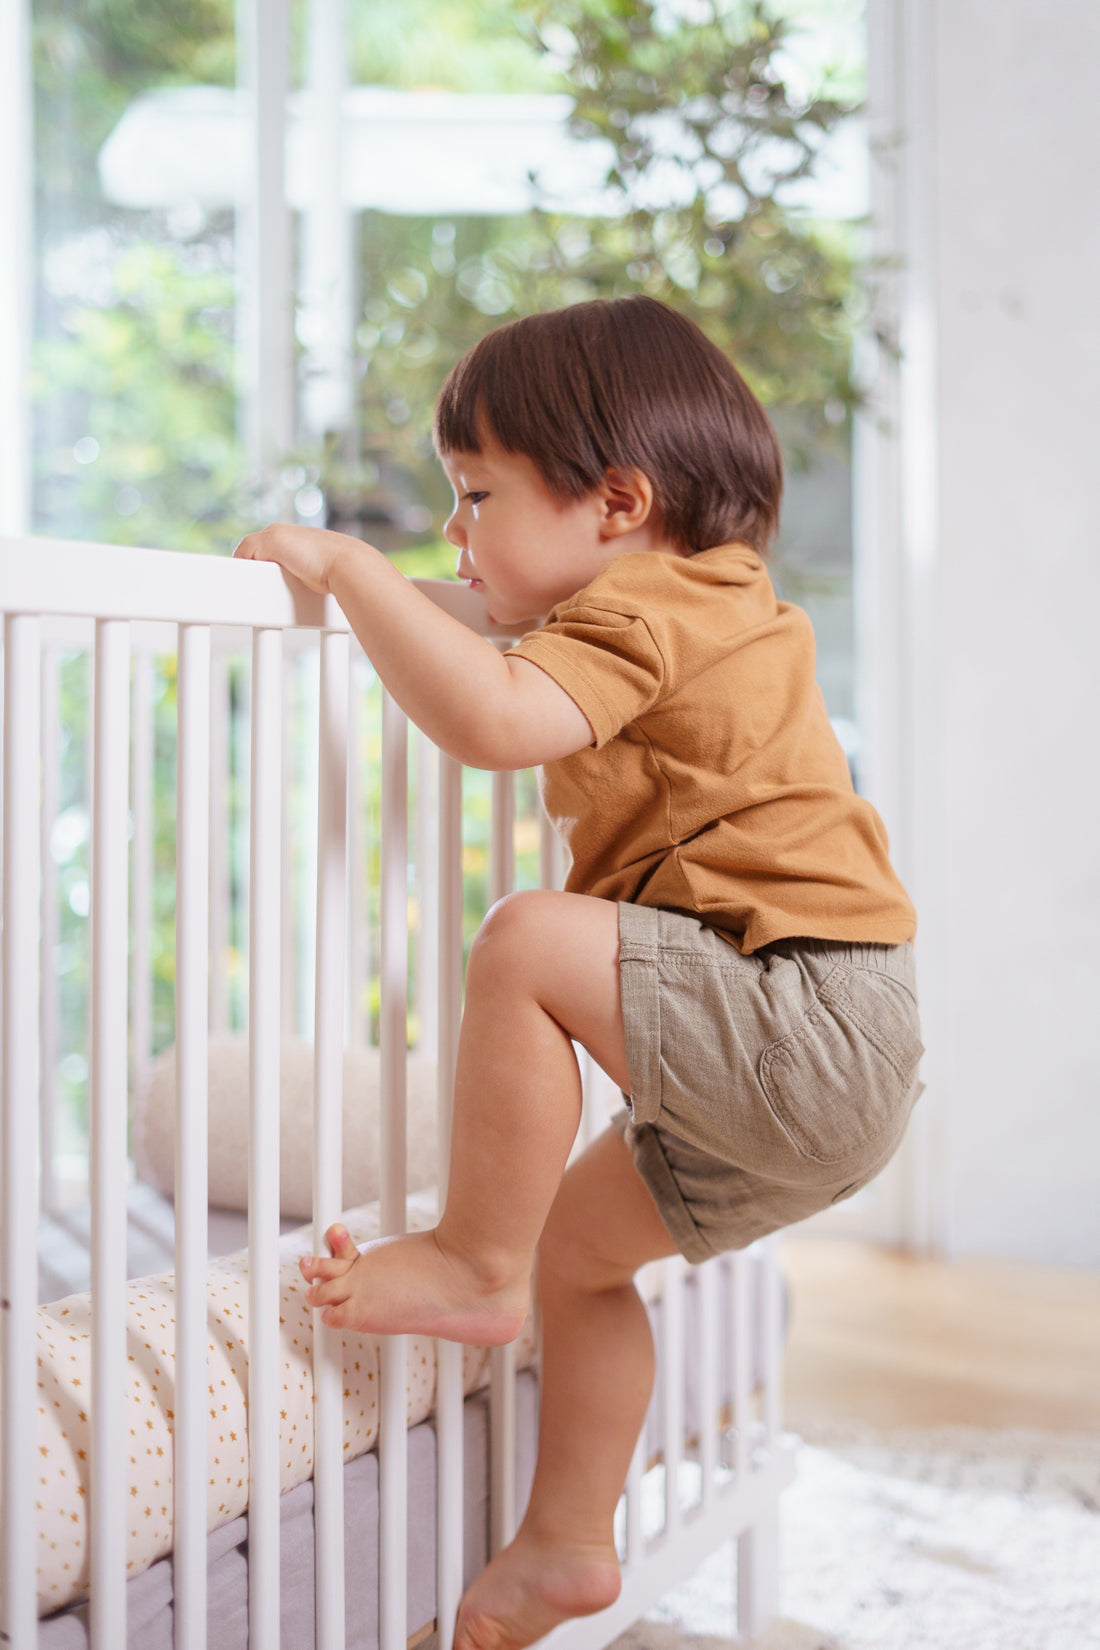 When to switch from a crib to a toddler bed